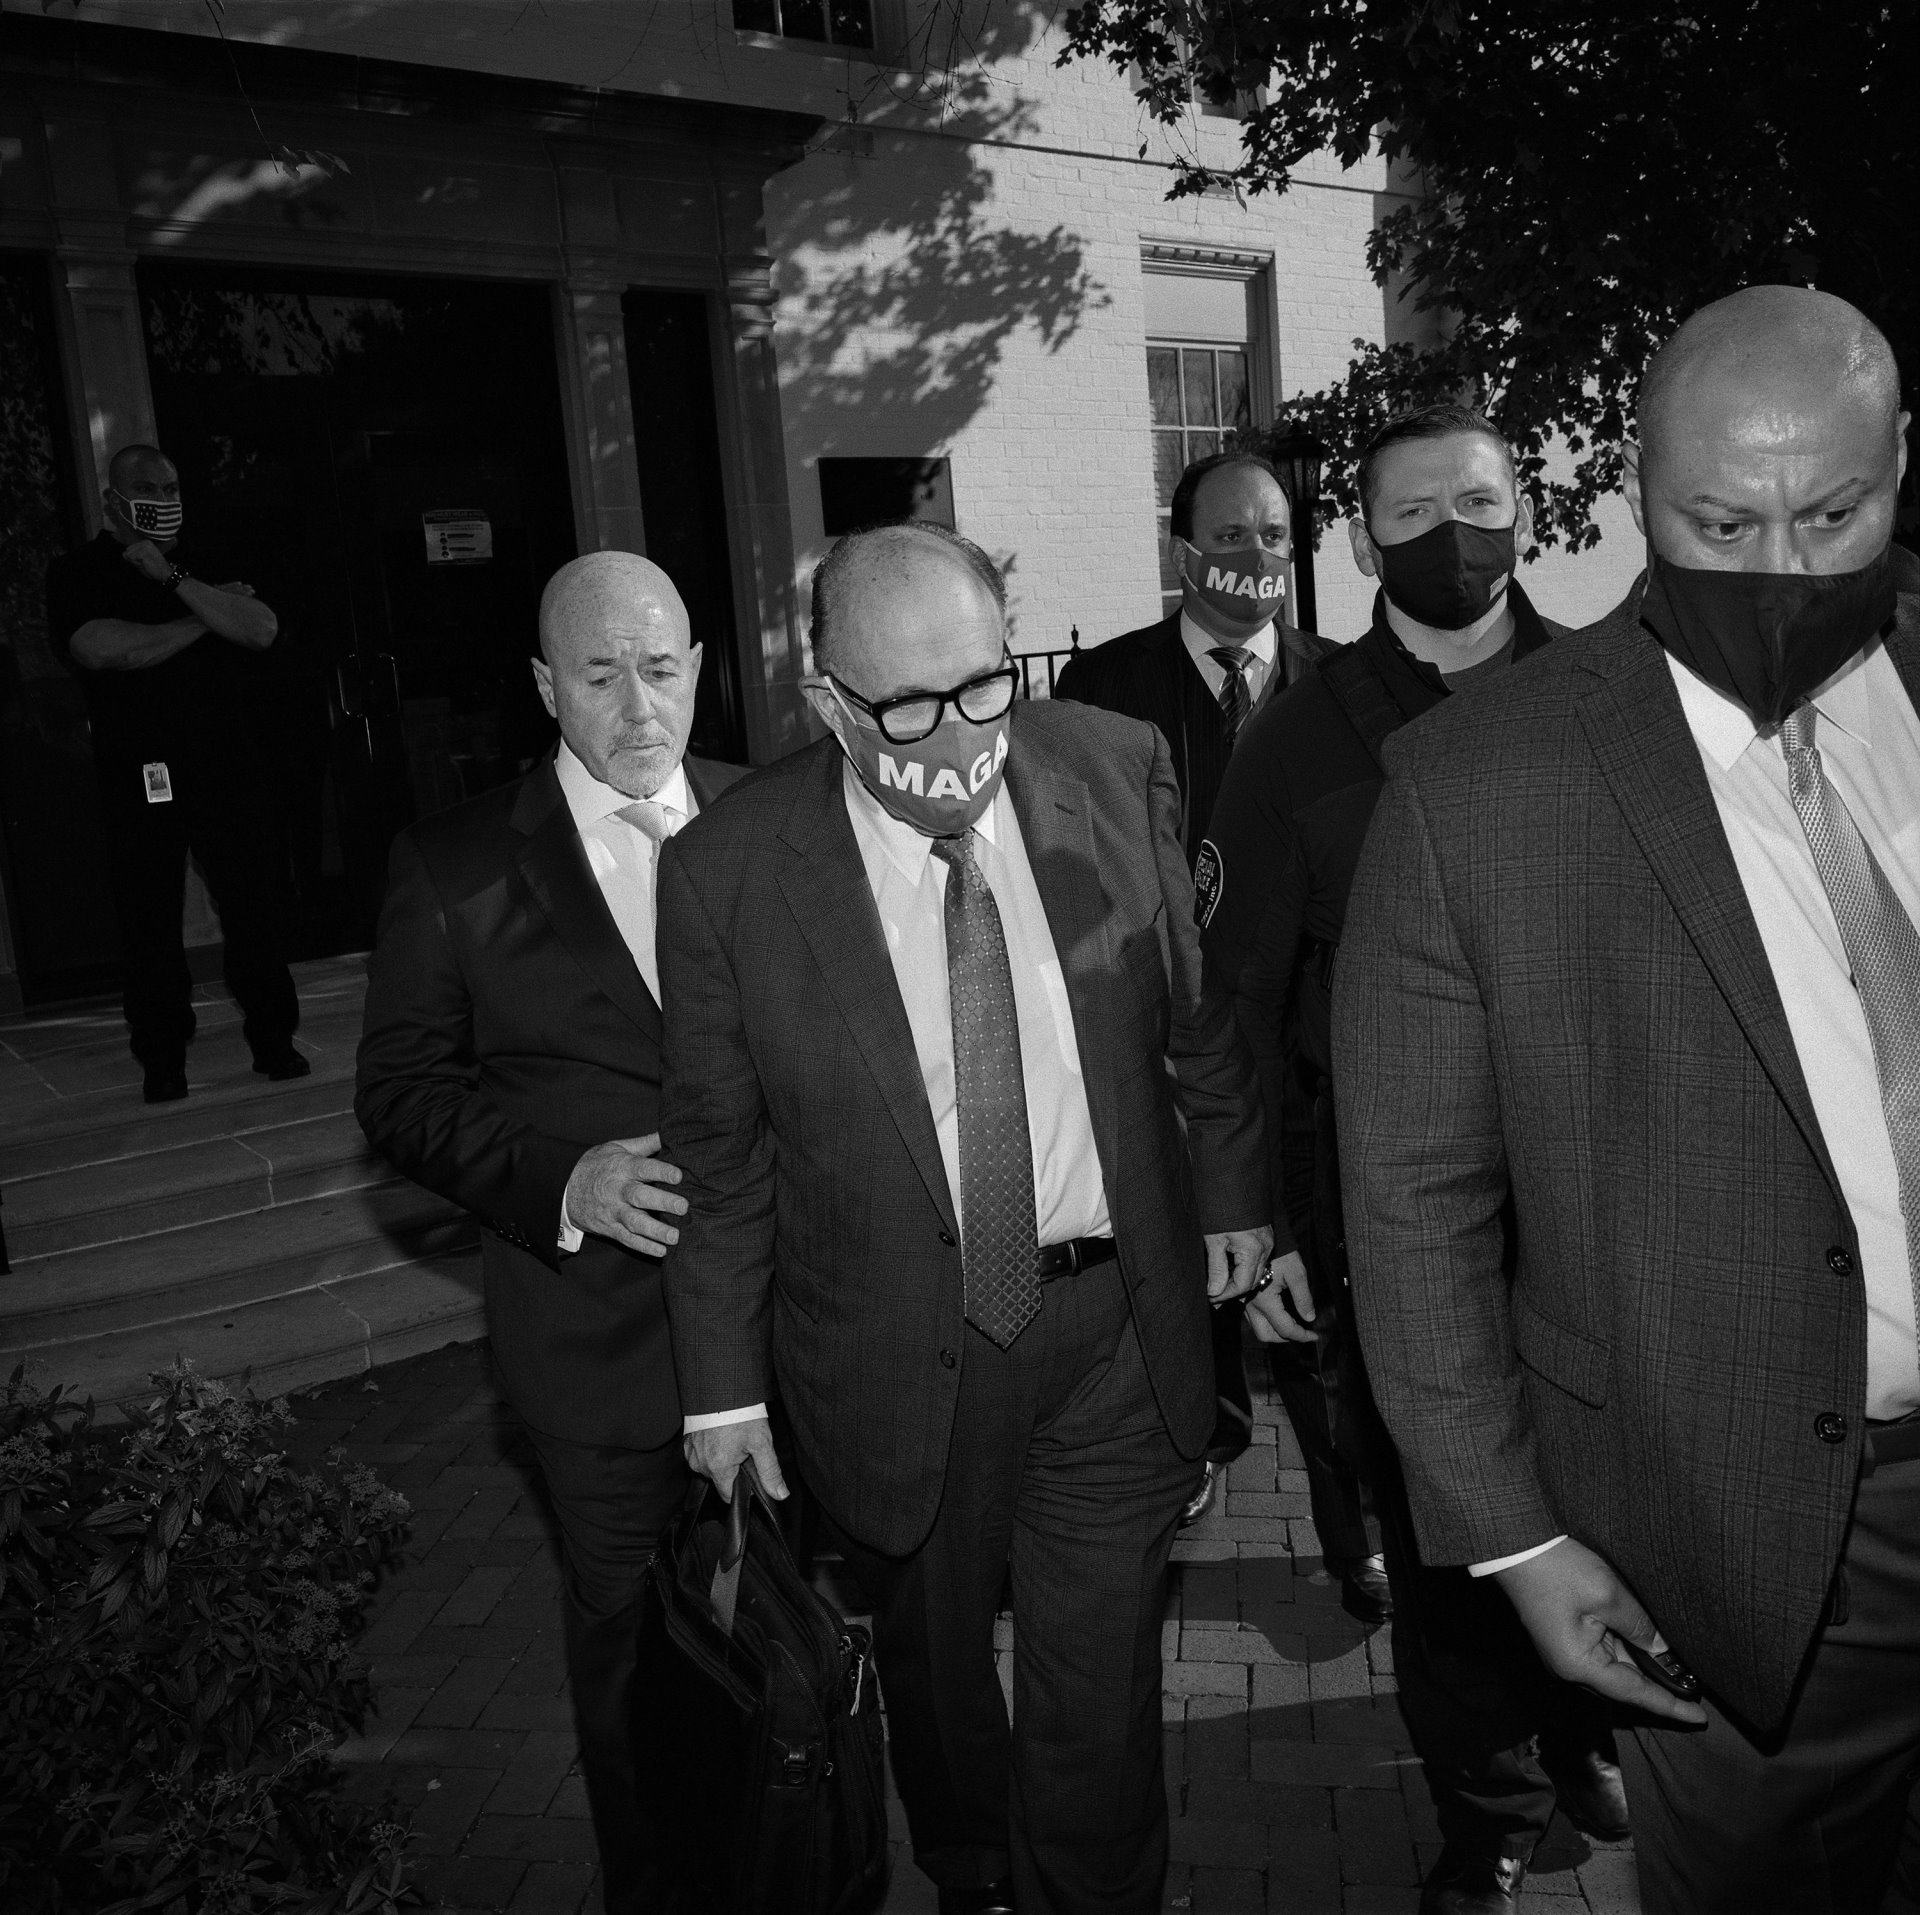 Rudy Giuliani, the president&rsquo;s personal lawyer, and his security detail leave a news conference at the Republican National Committee headquarters. The former mayor of New York City was one of the key players in Trump&rsquo;s attempts to challenge the election.